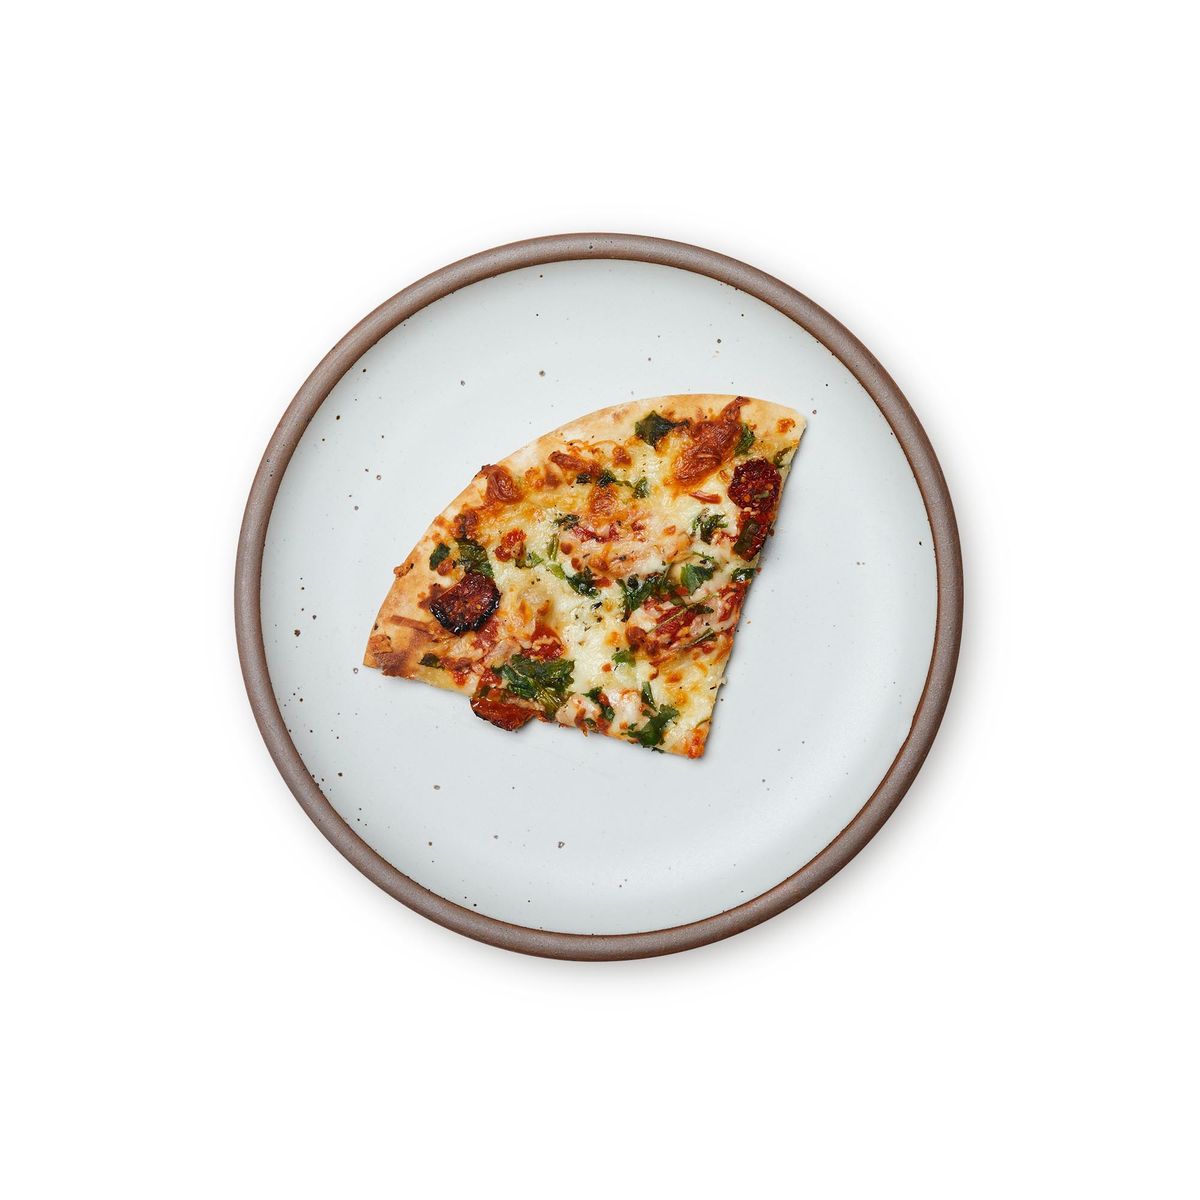 A slice of pizza on a dinner sized ceramic plate in a cool white color featuring iron speckles and an unglazed rim